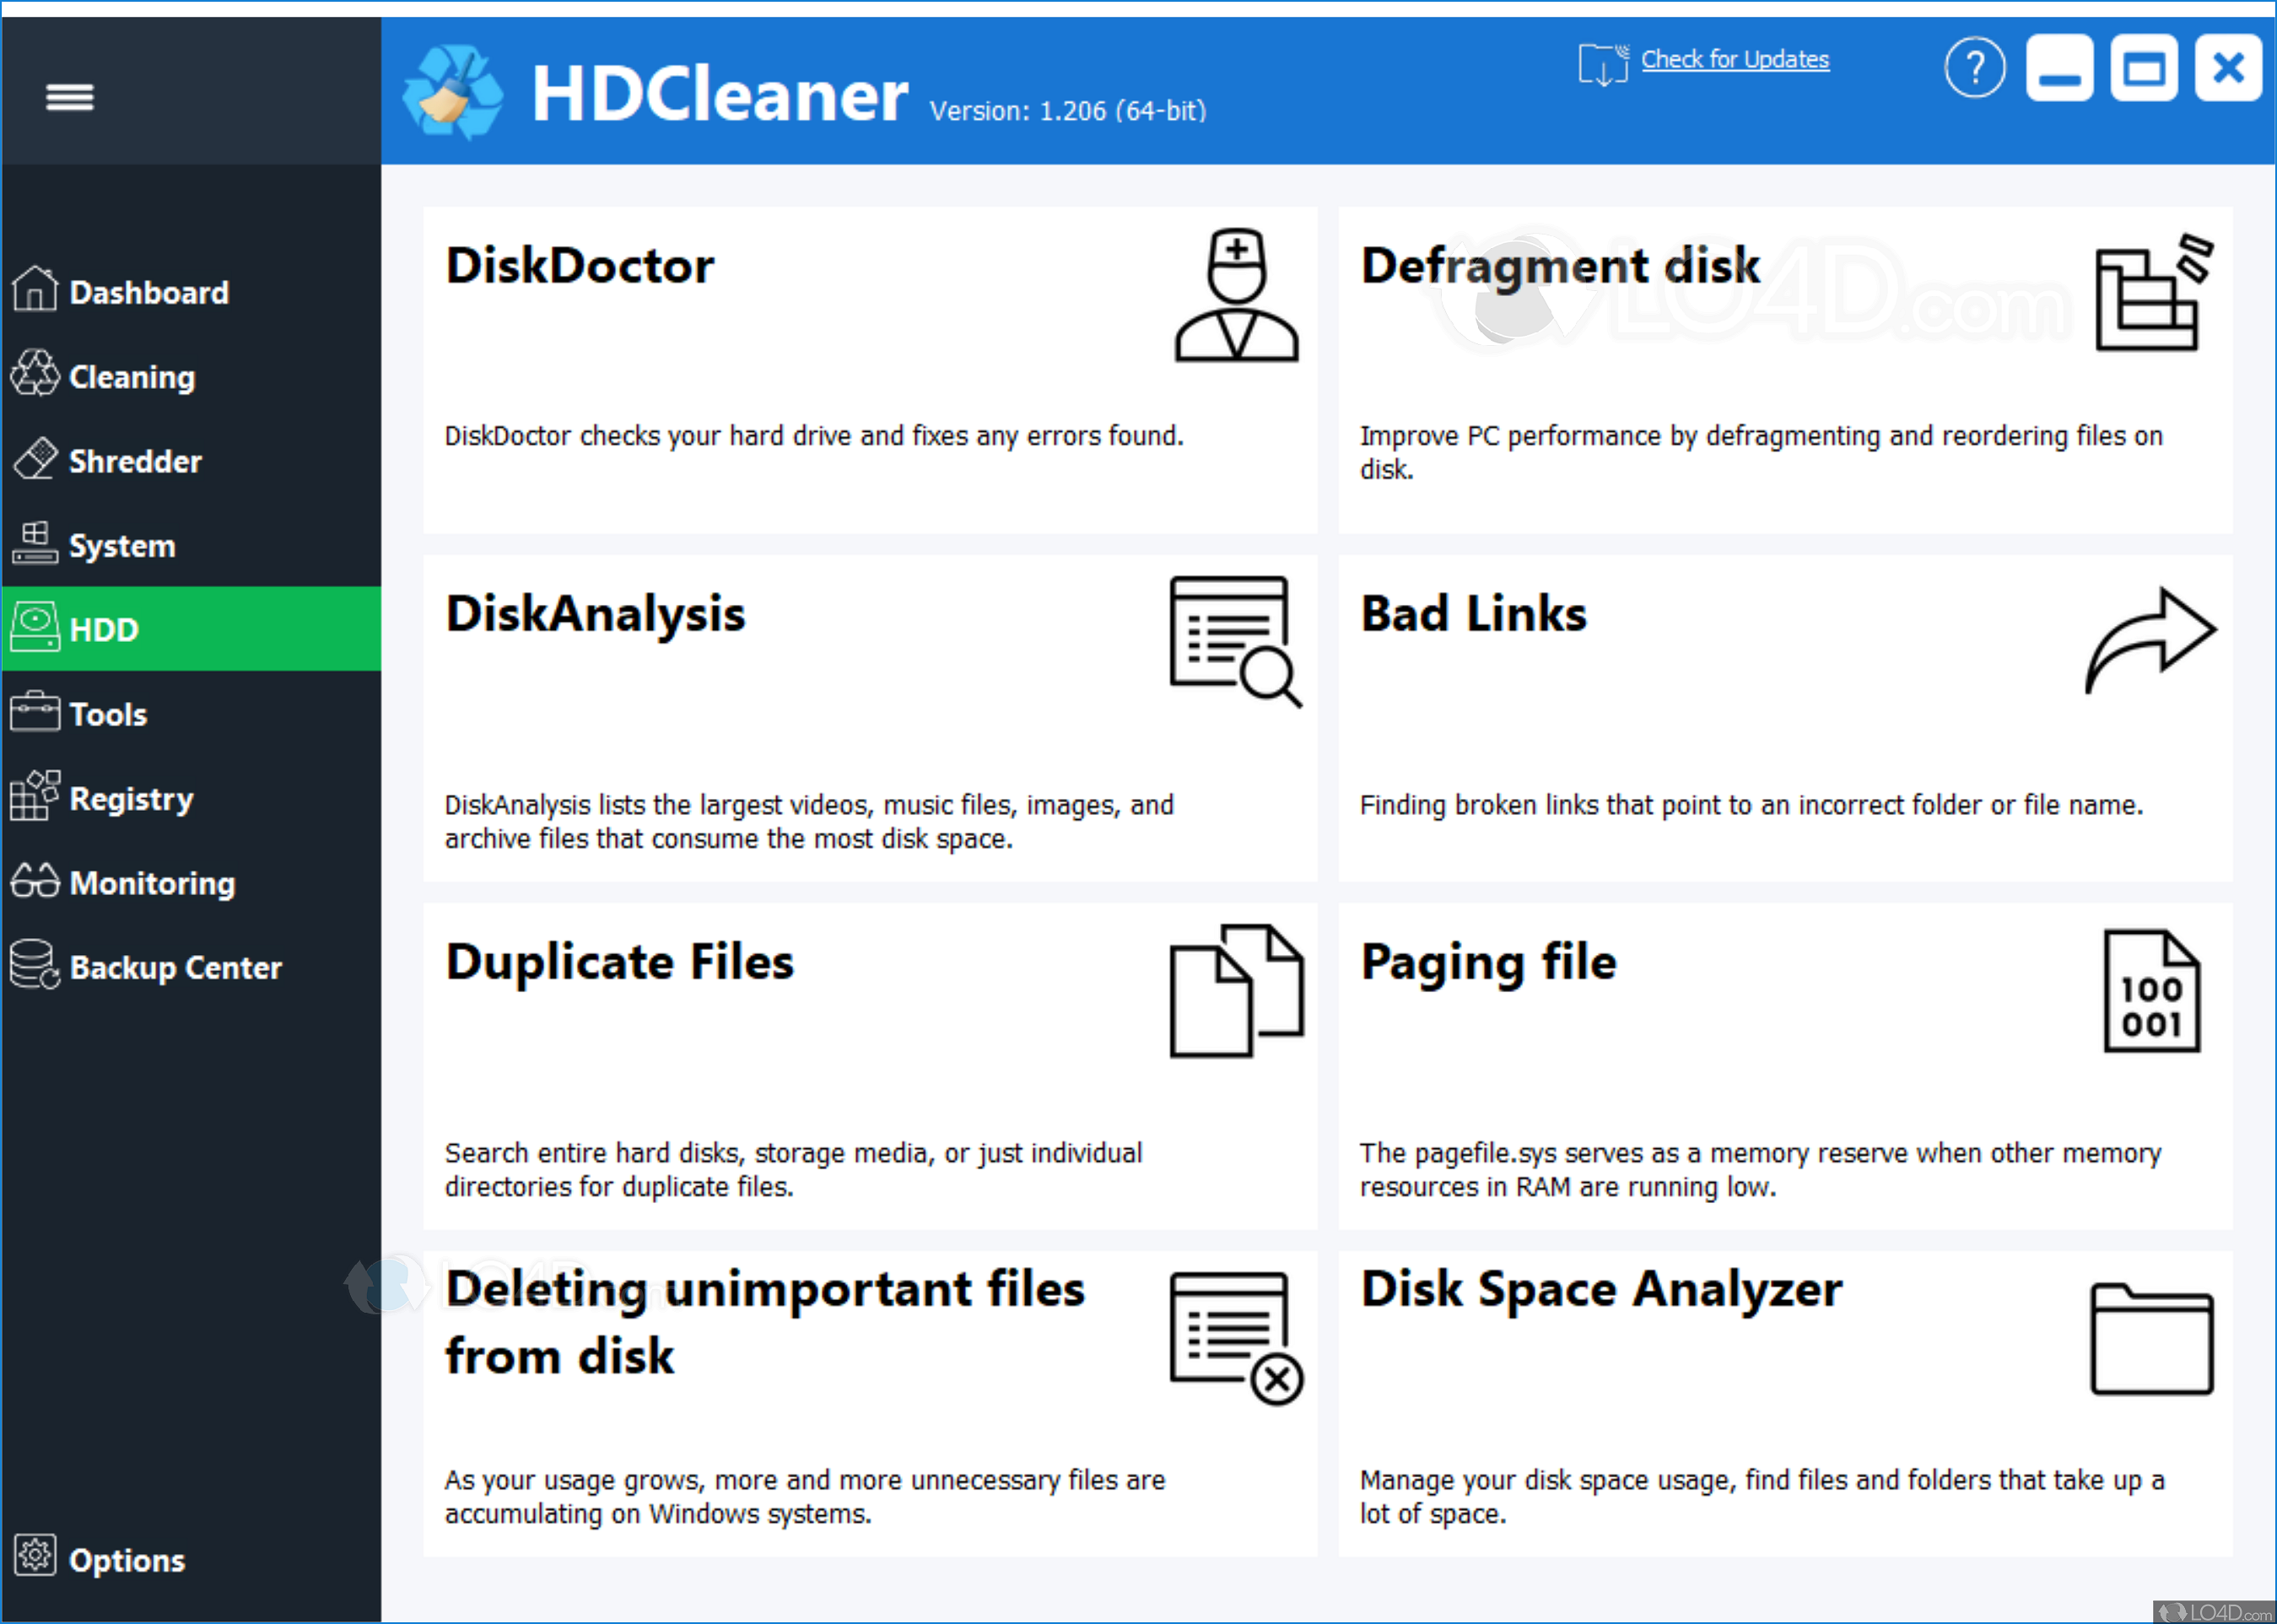 instal the new version for ios HDCleaner 2.051